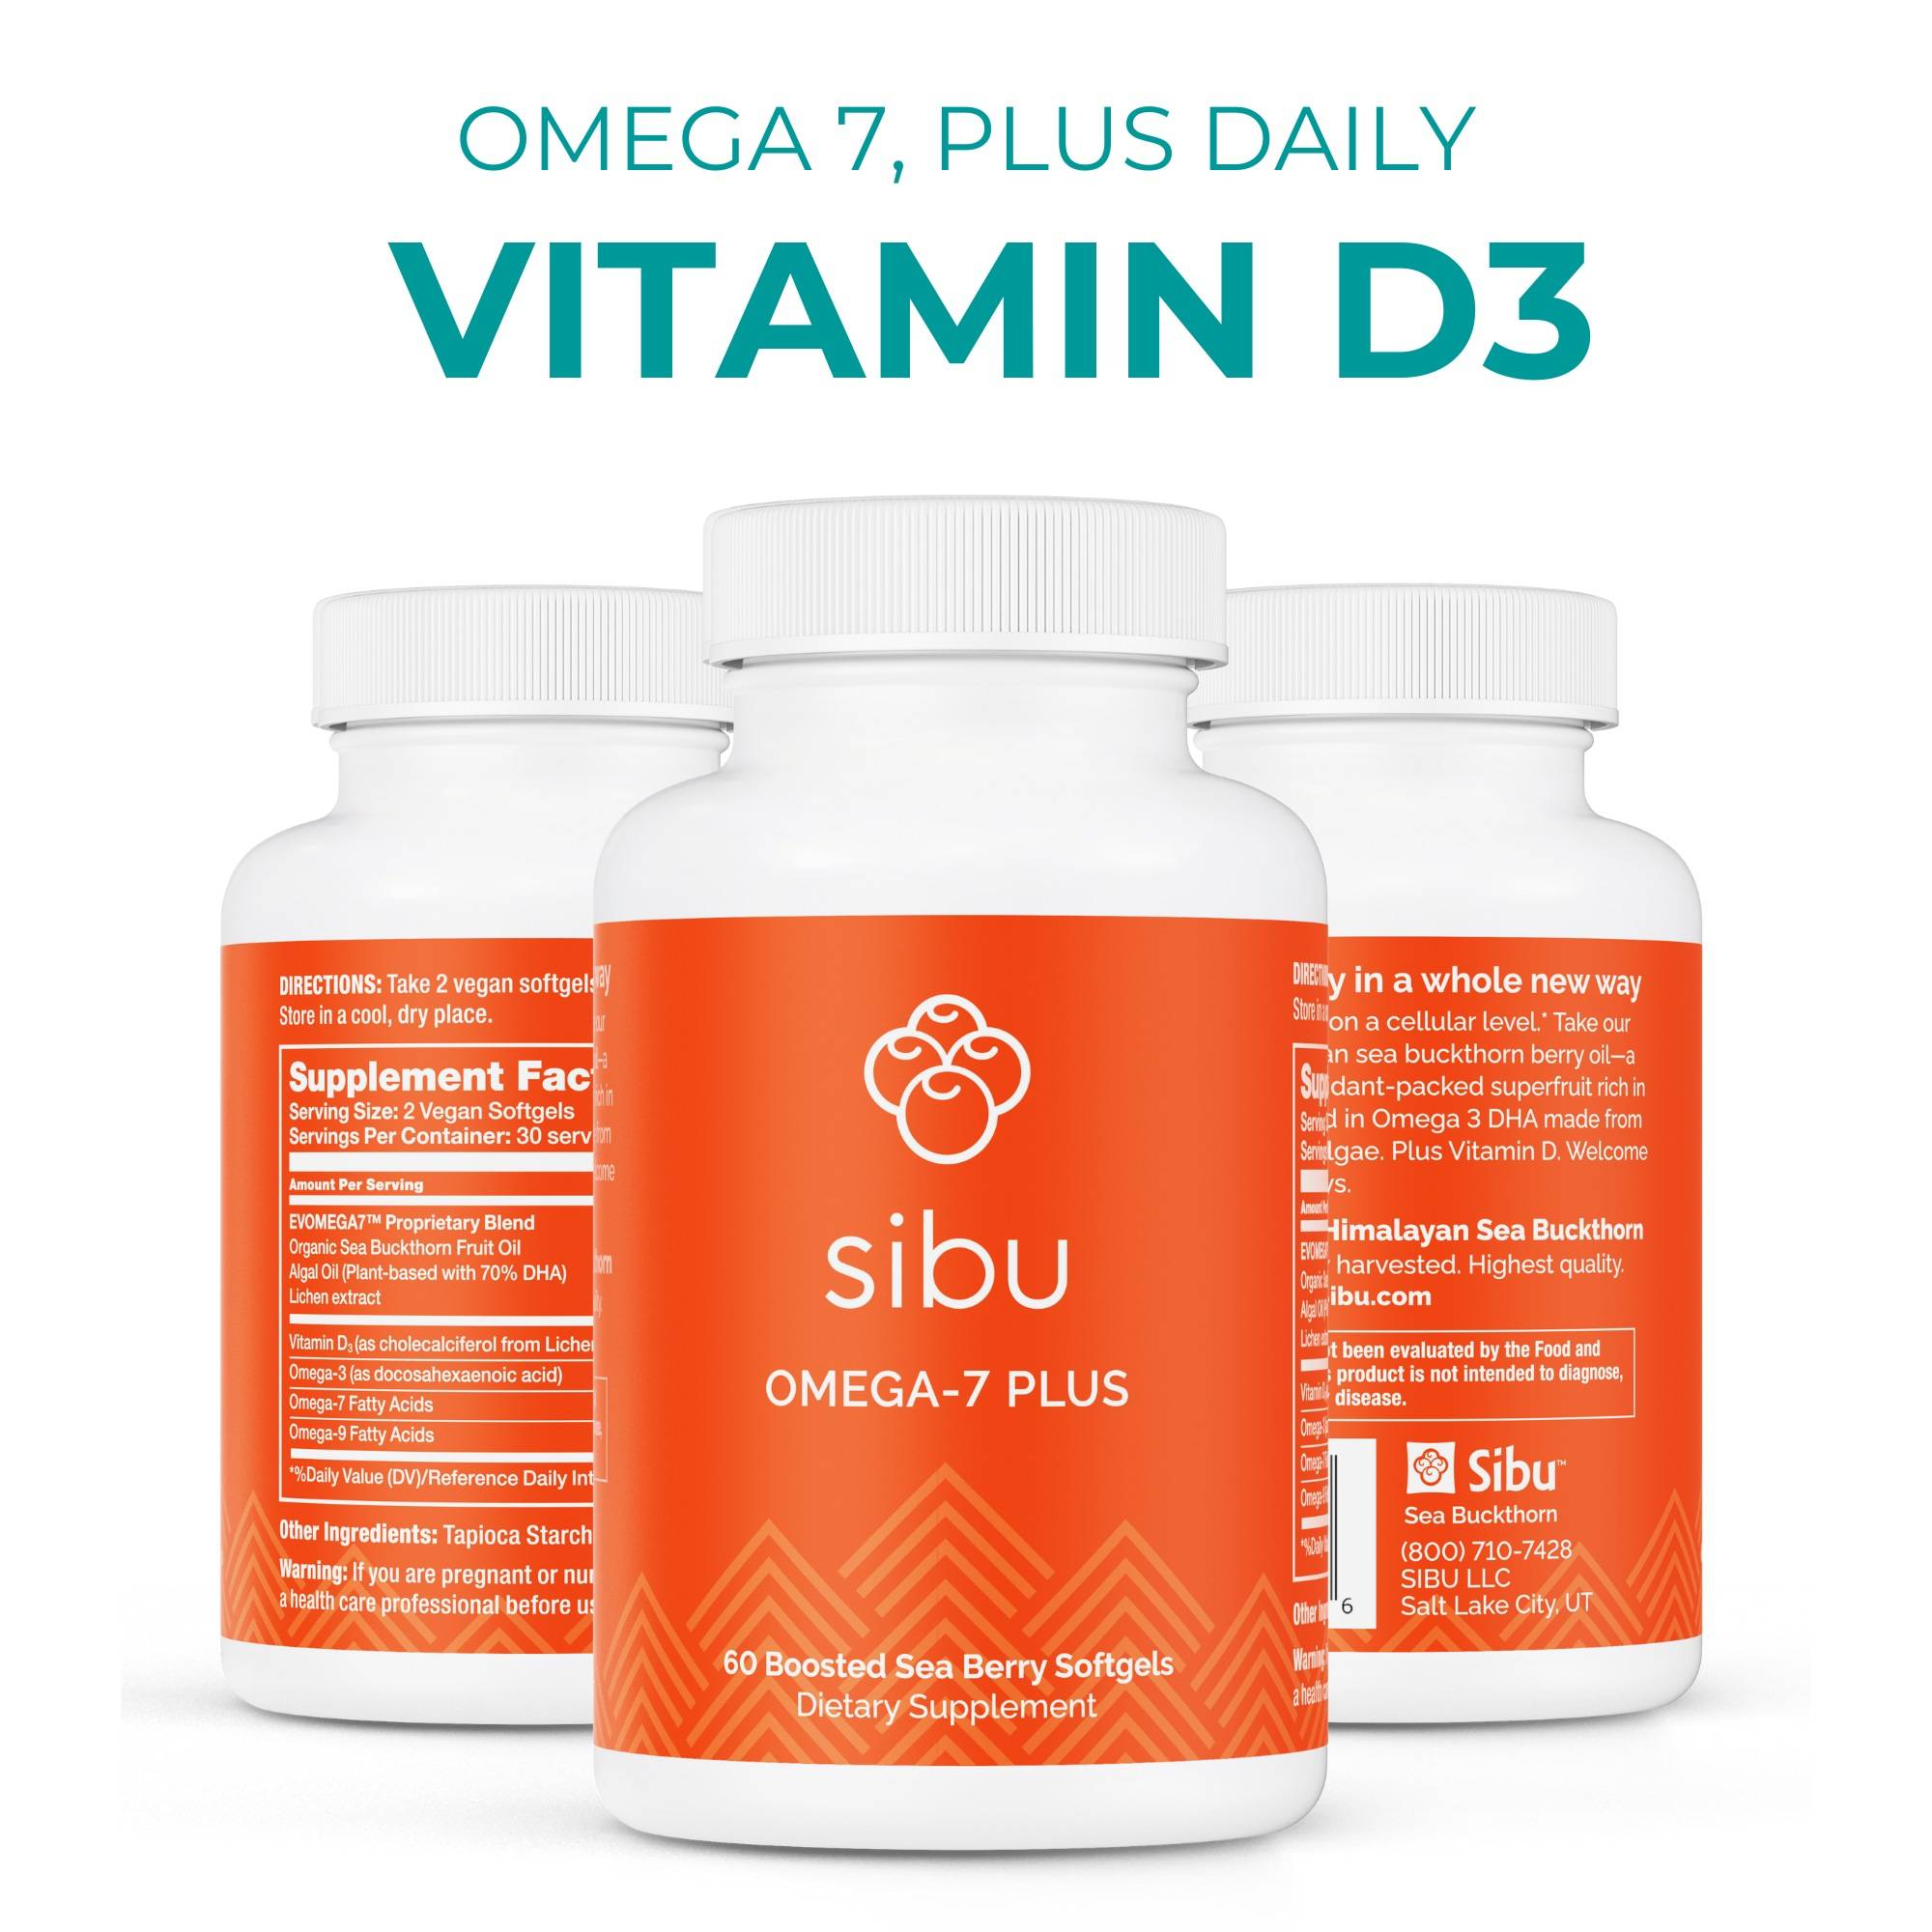 new omega 7 plus with vitamin d3 and omega 3 dha